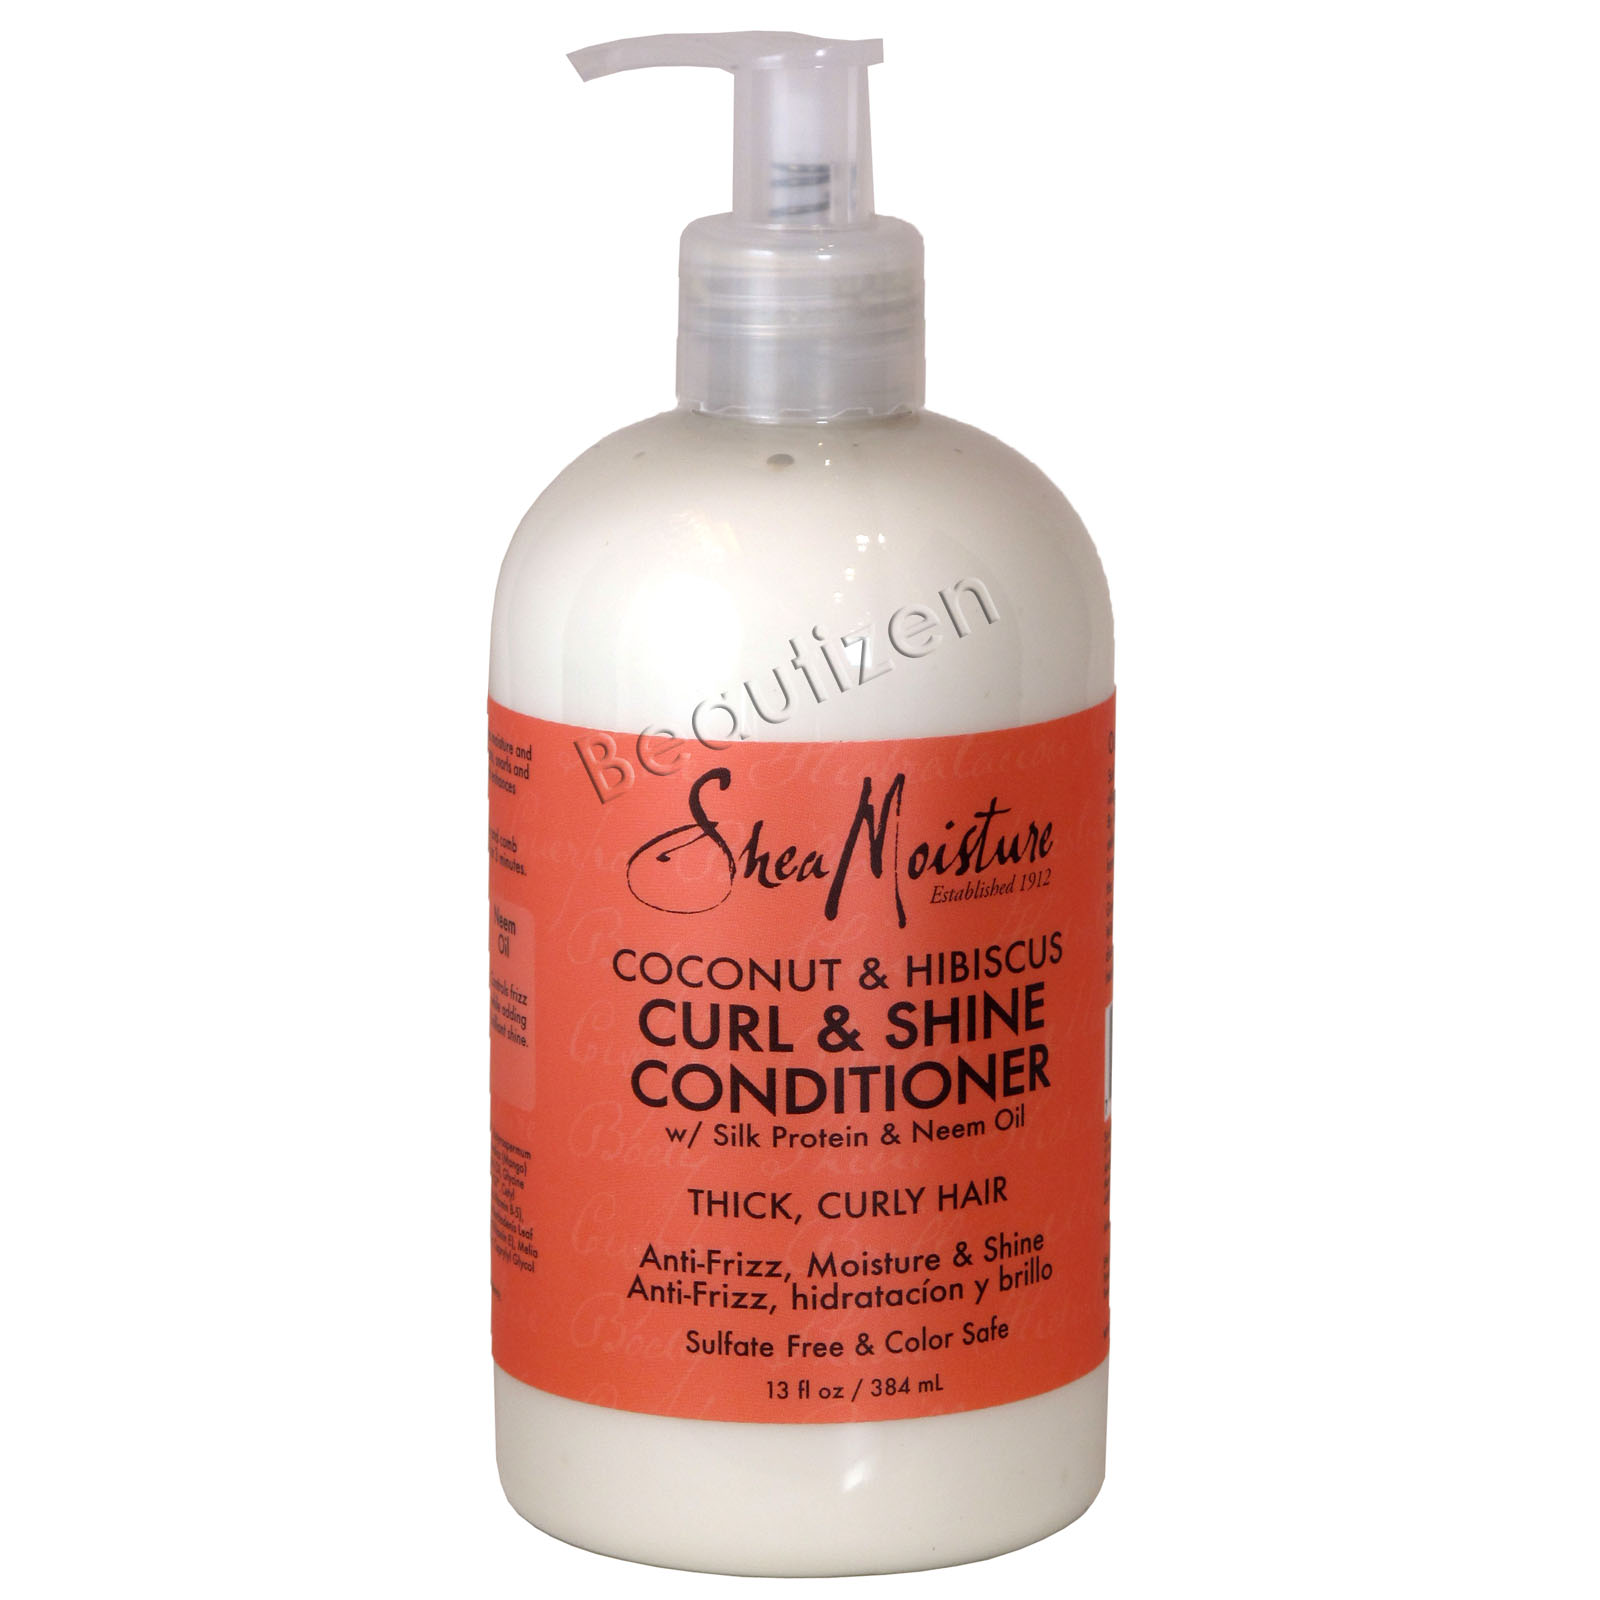 46-best-shea-moisture-products-pictures-on-style